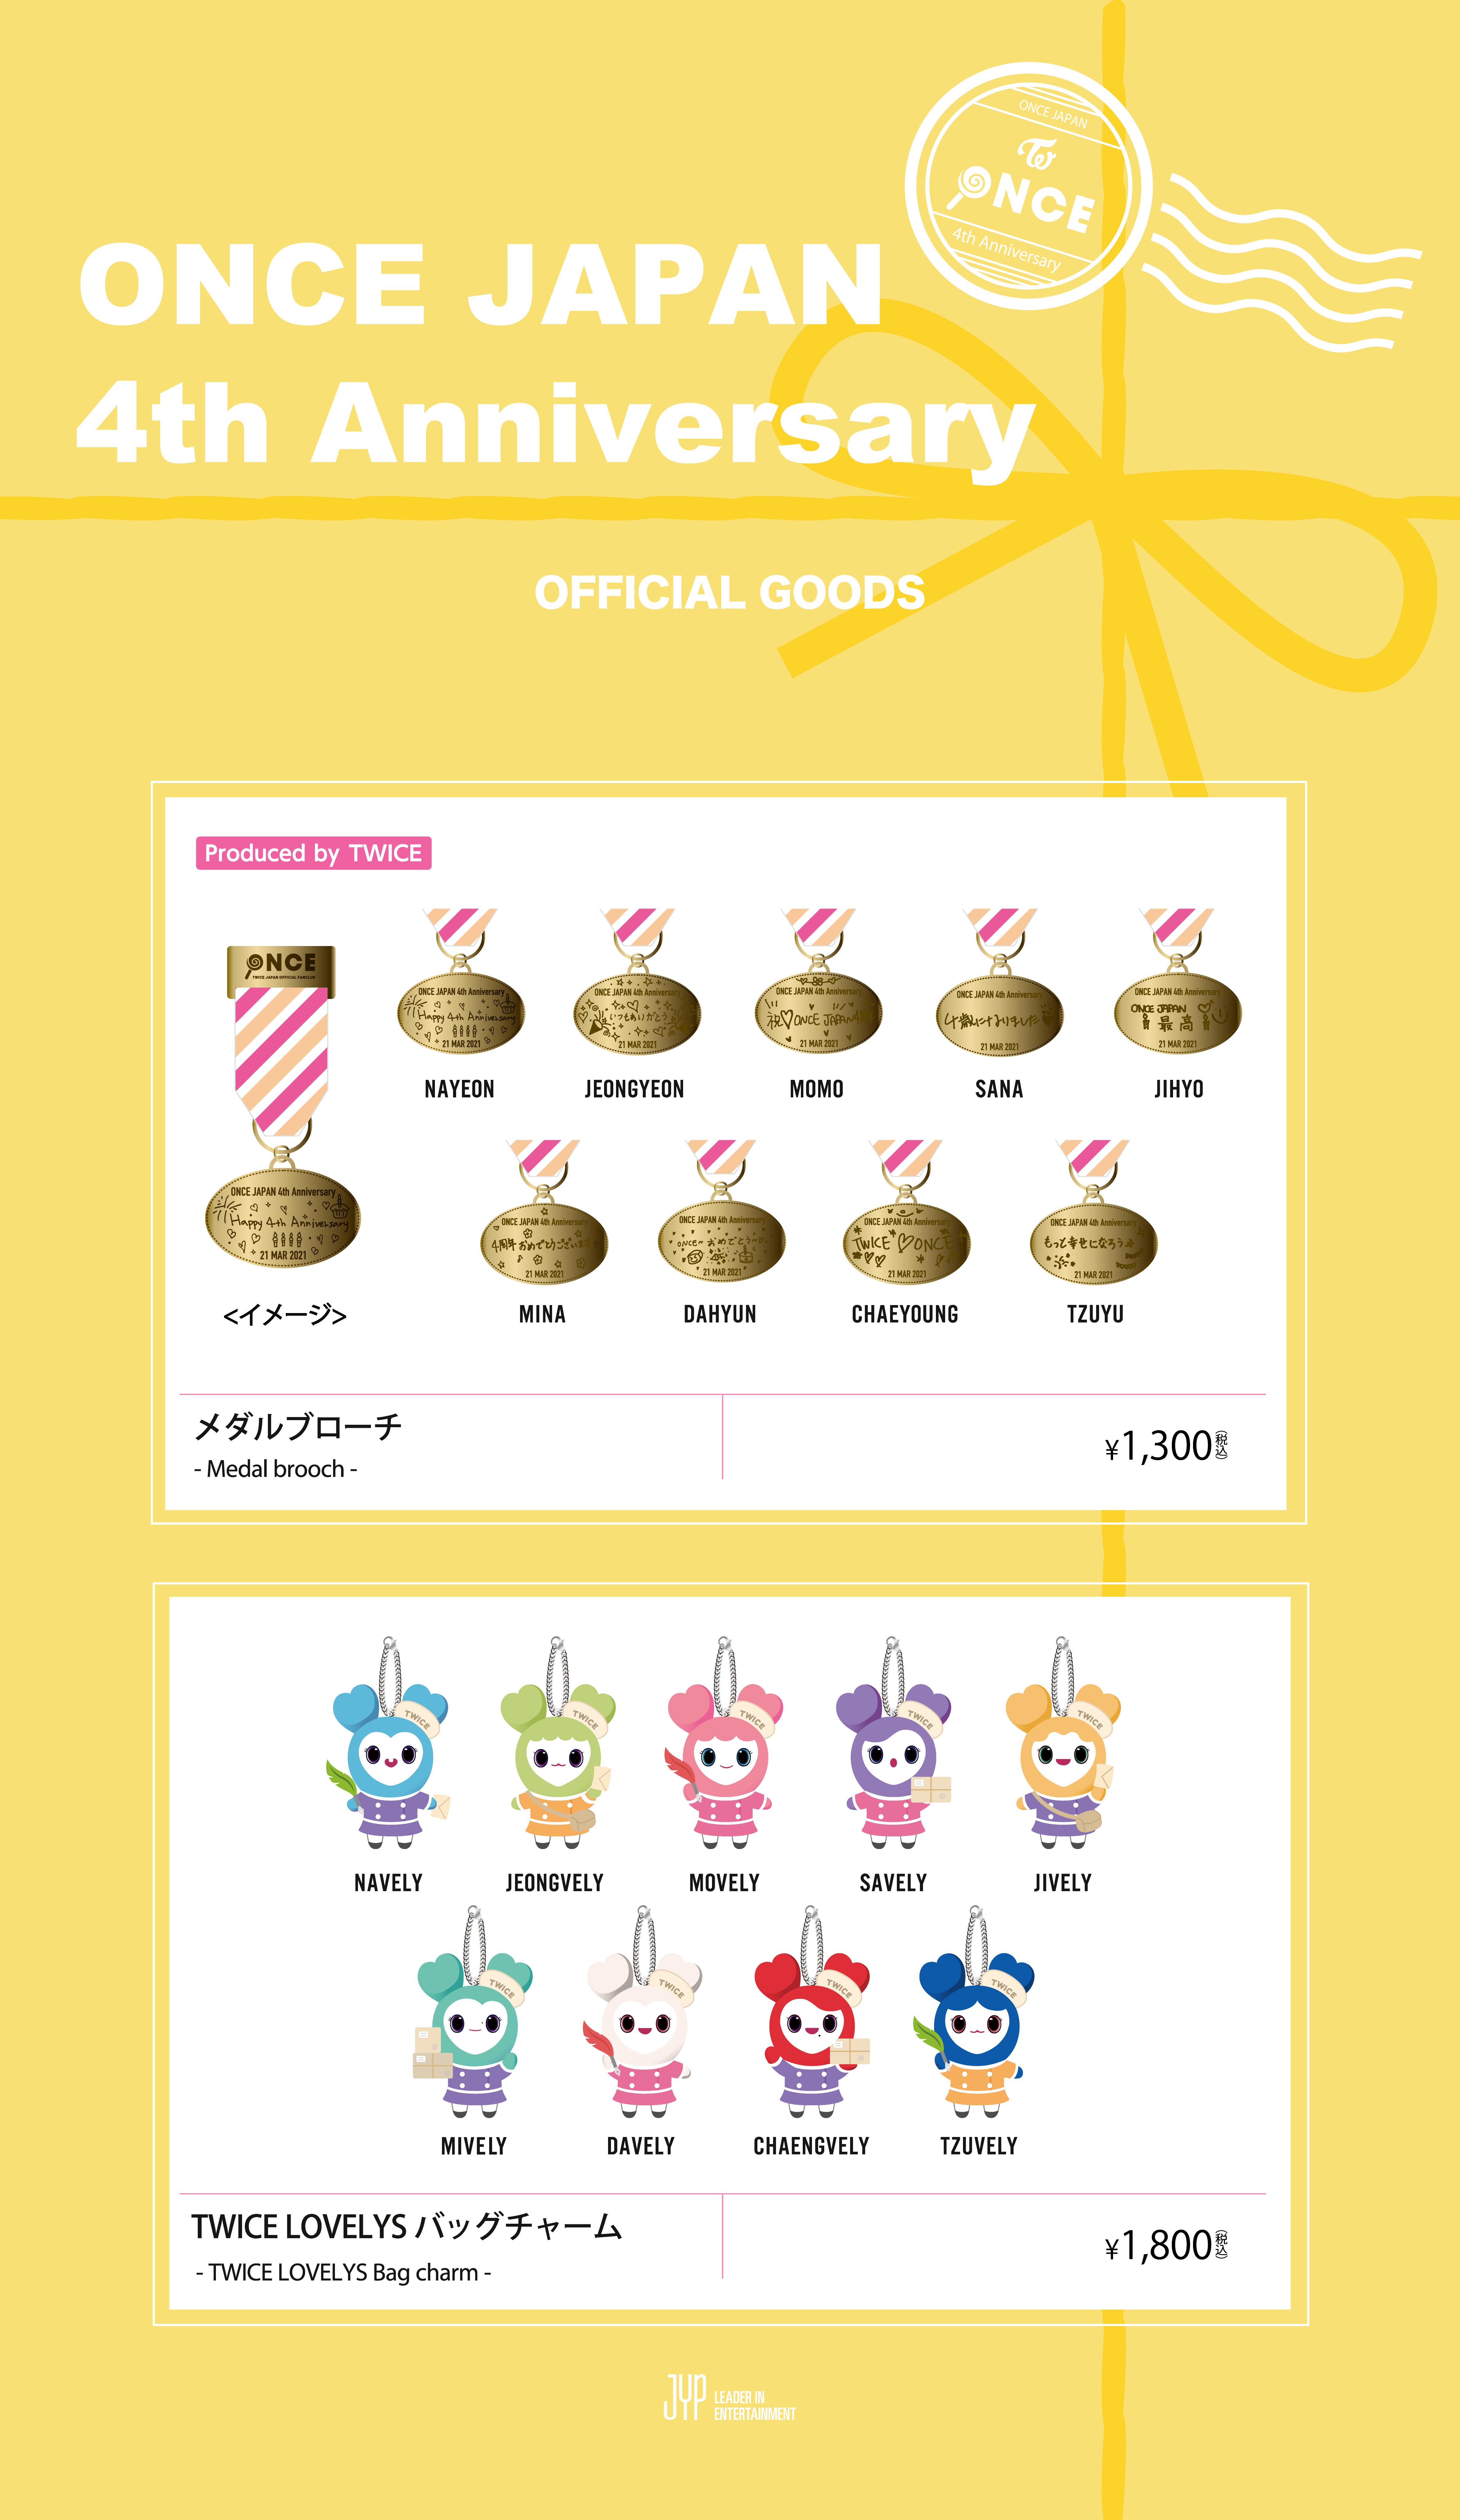 ONCETWICE JAPAN OFFICIAL FANCLUB level 4